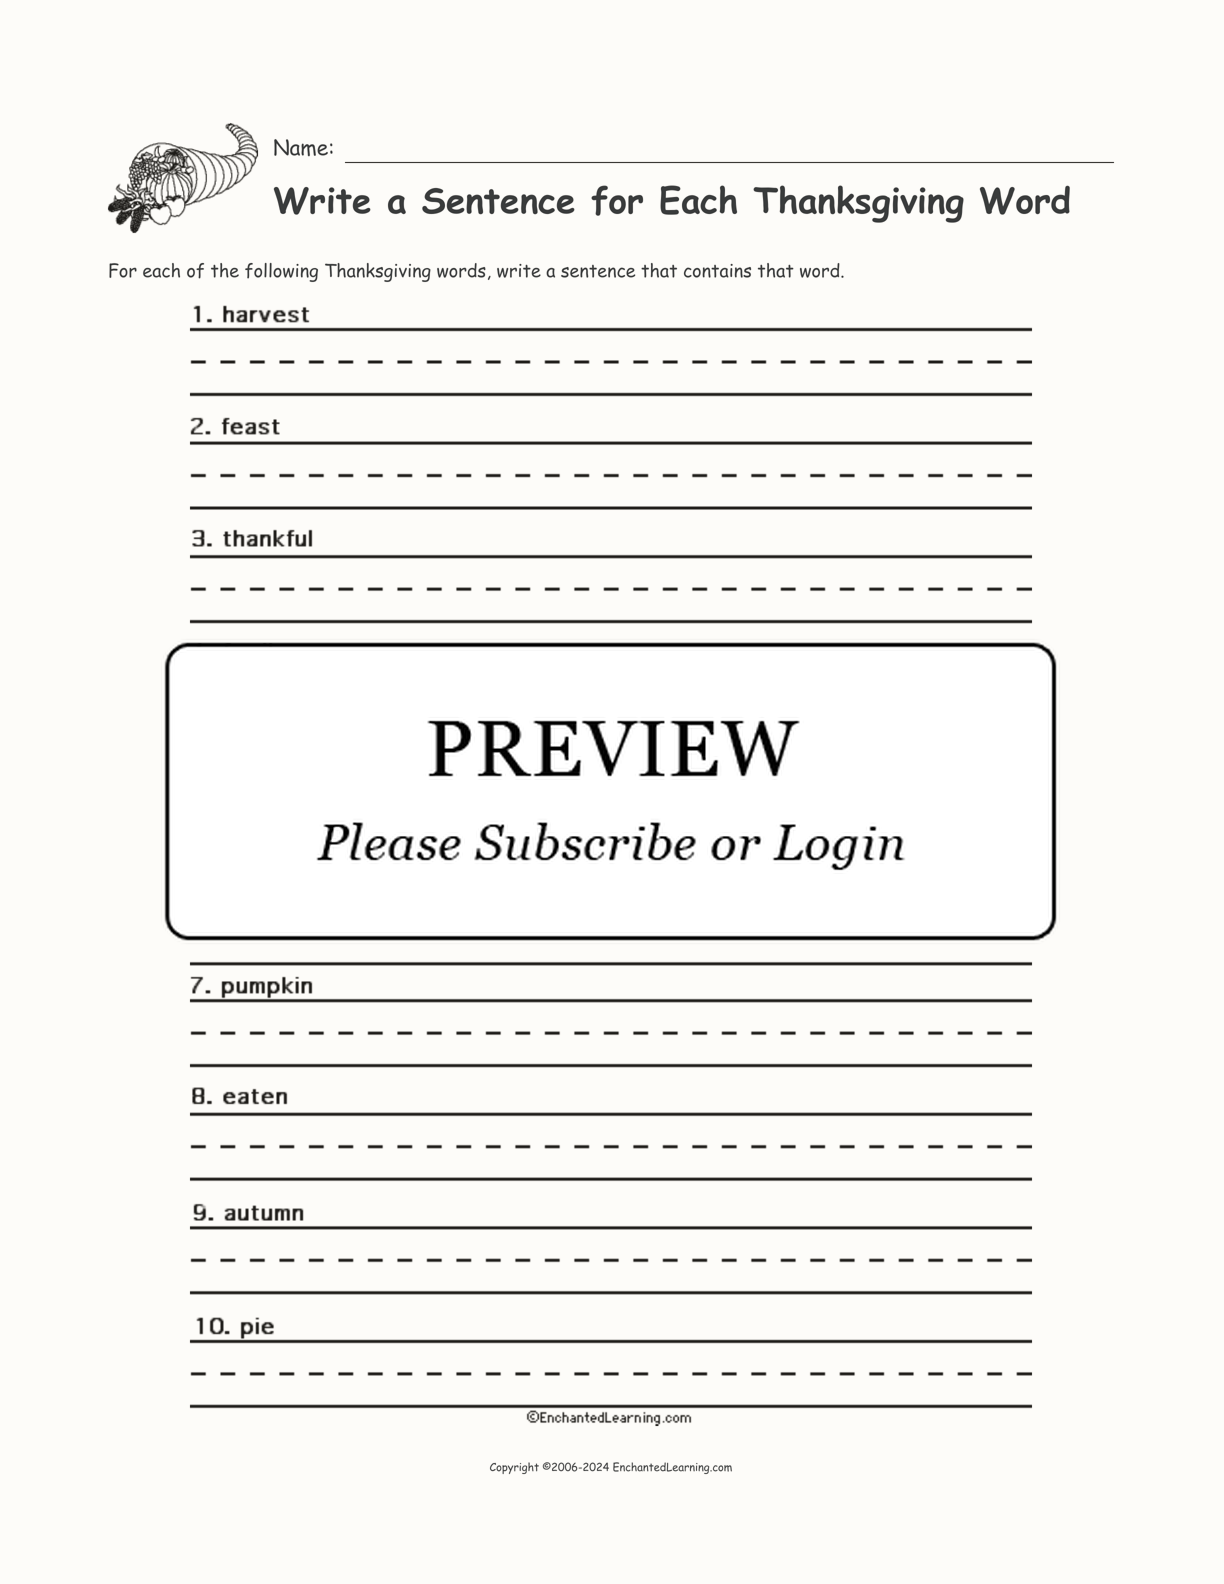 Write a Sentence for Each Thanksgiving Word interactive printout page 1